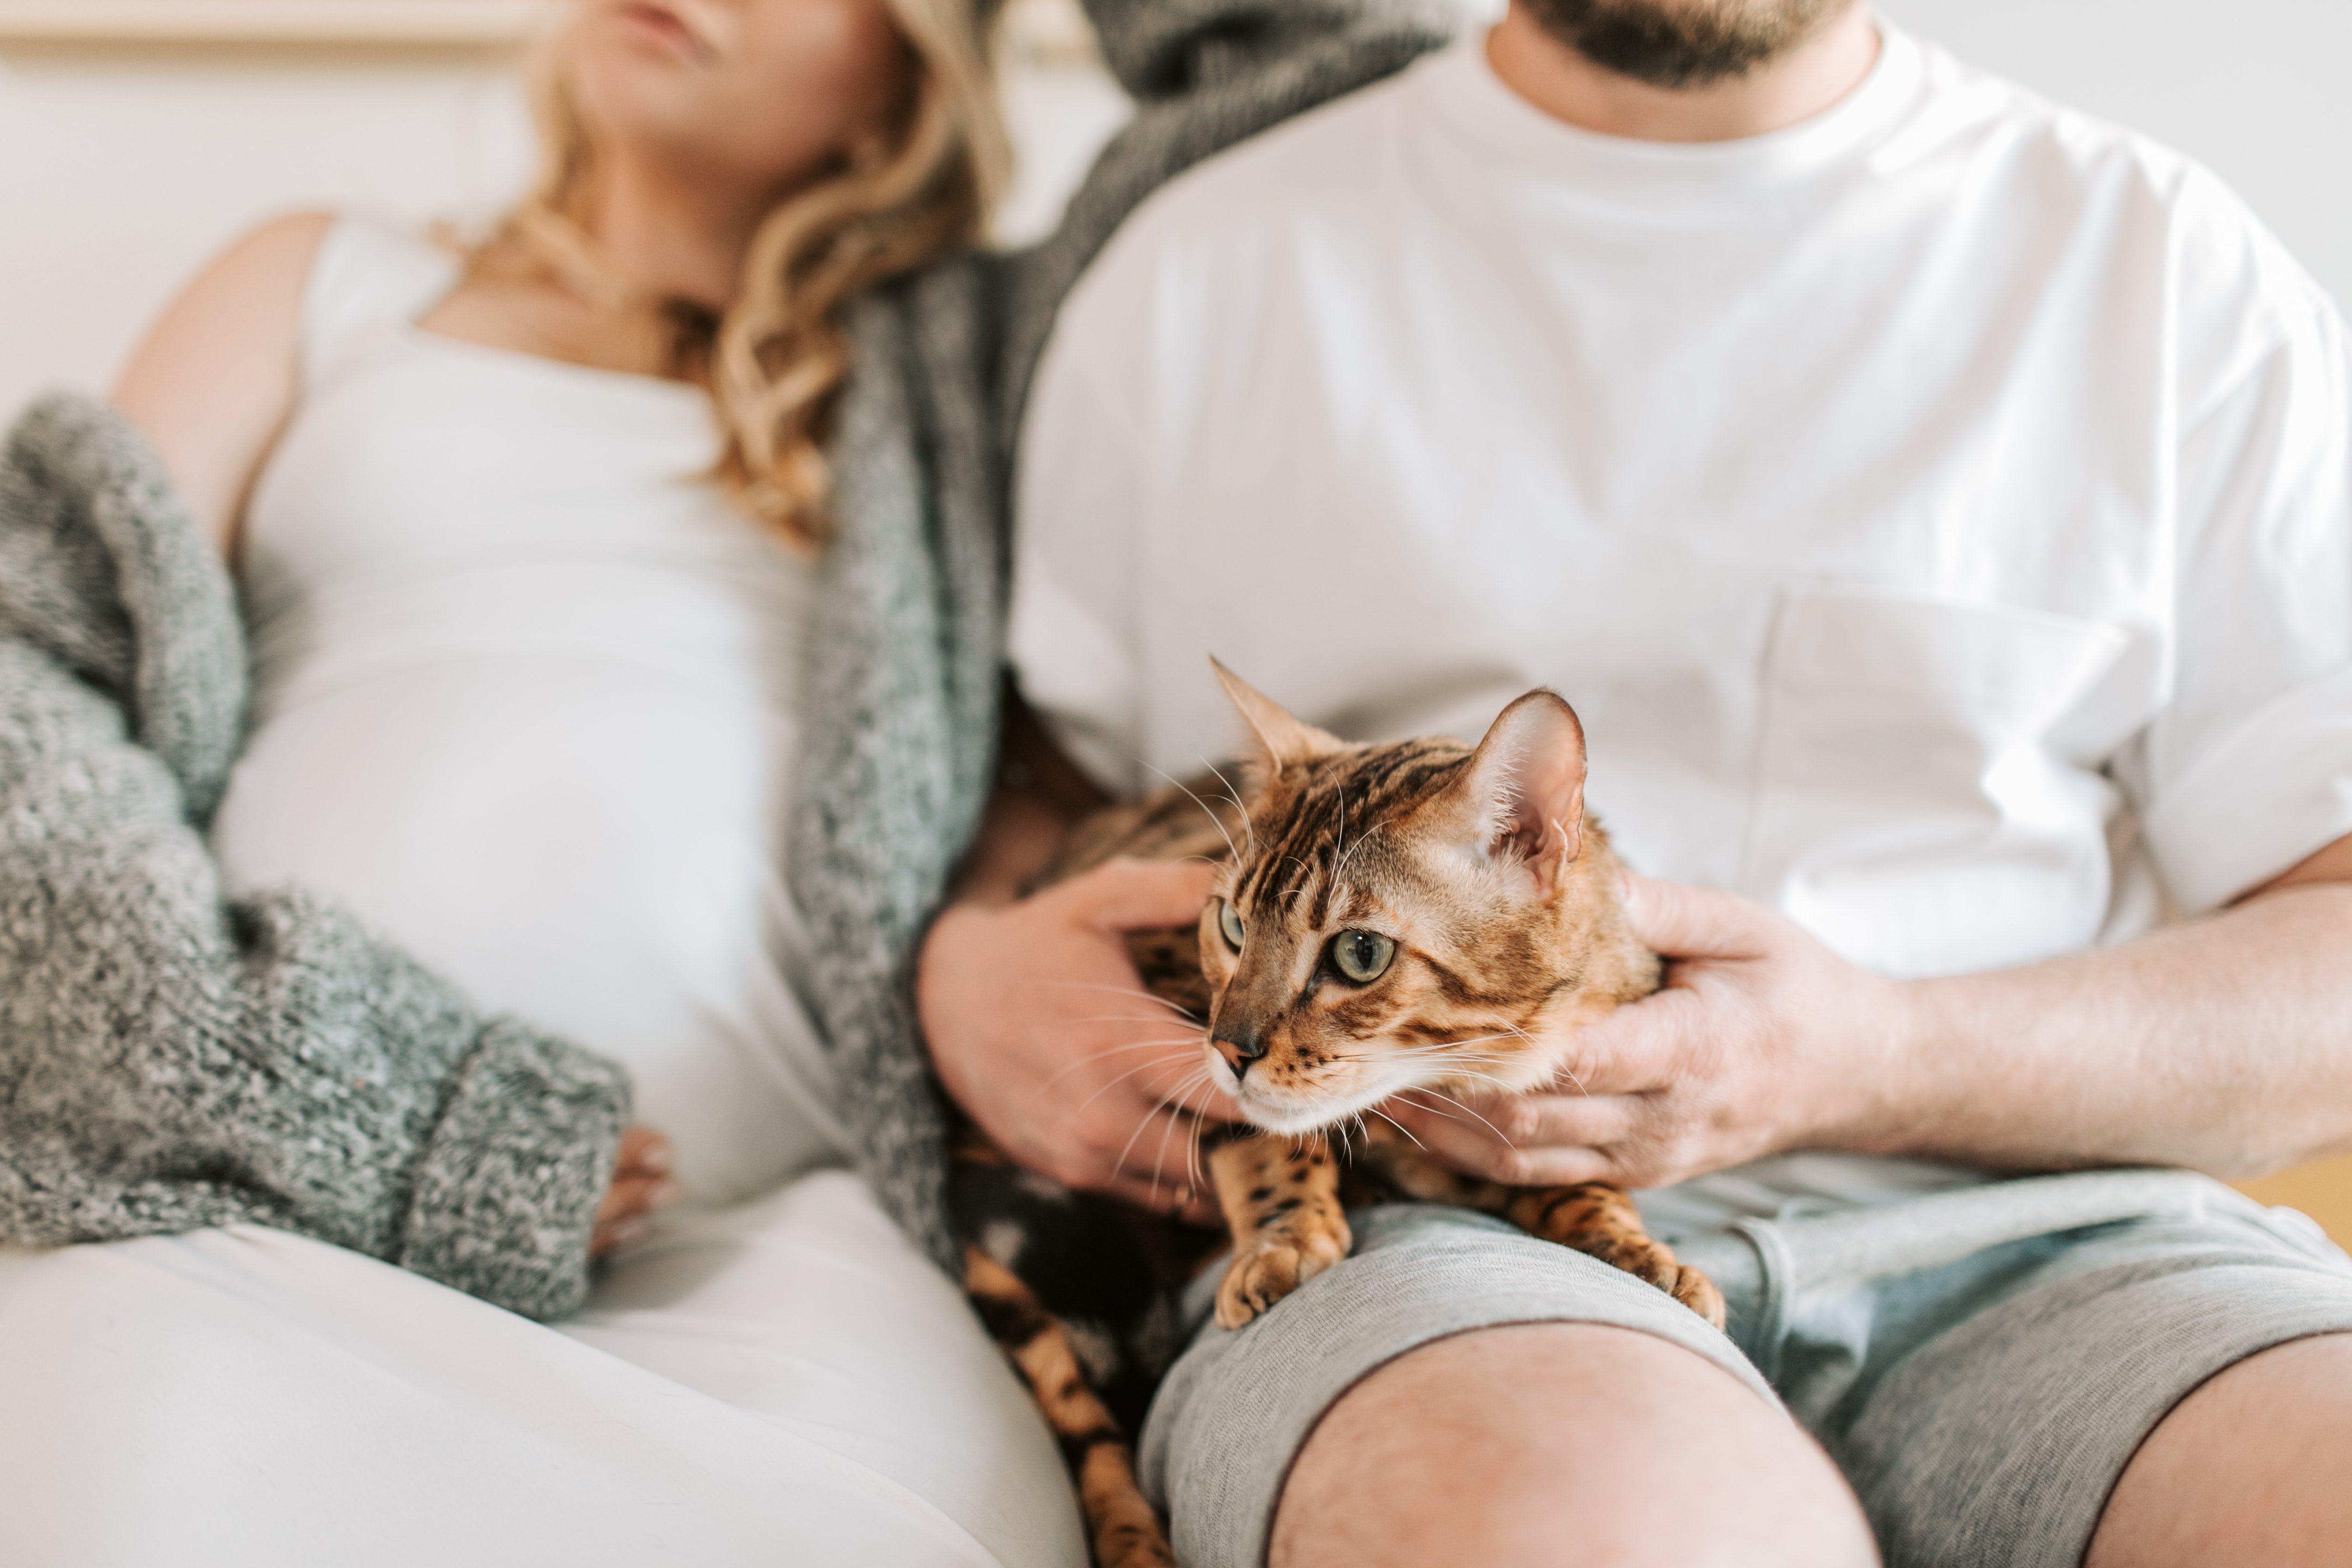 Pregnant woman with her husband and pet cat | Photo: Pexels